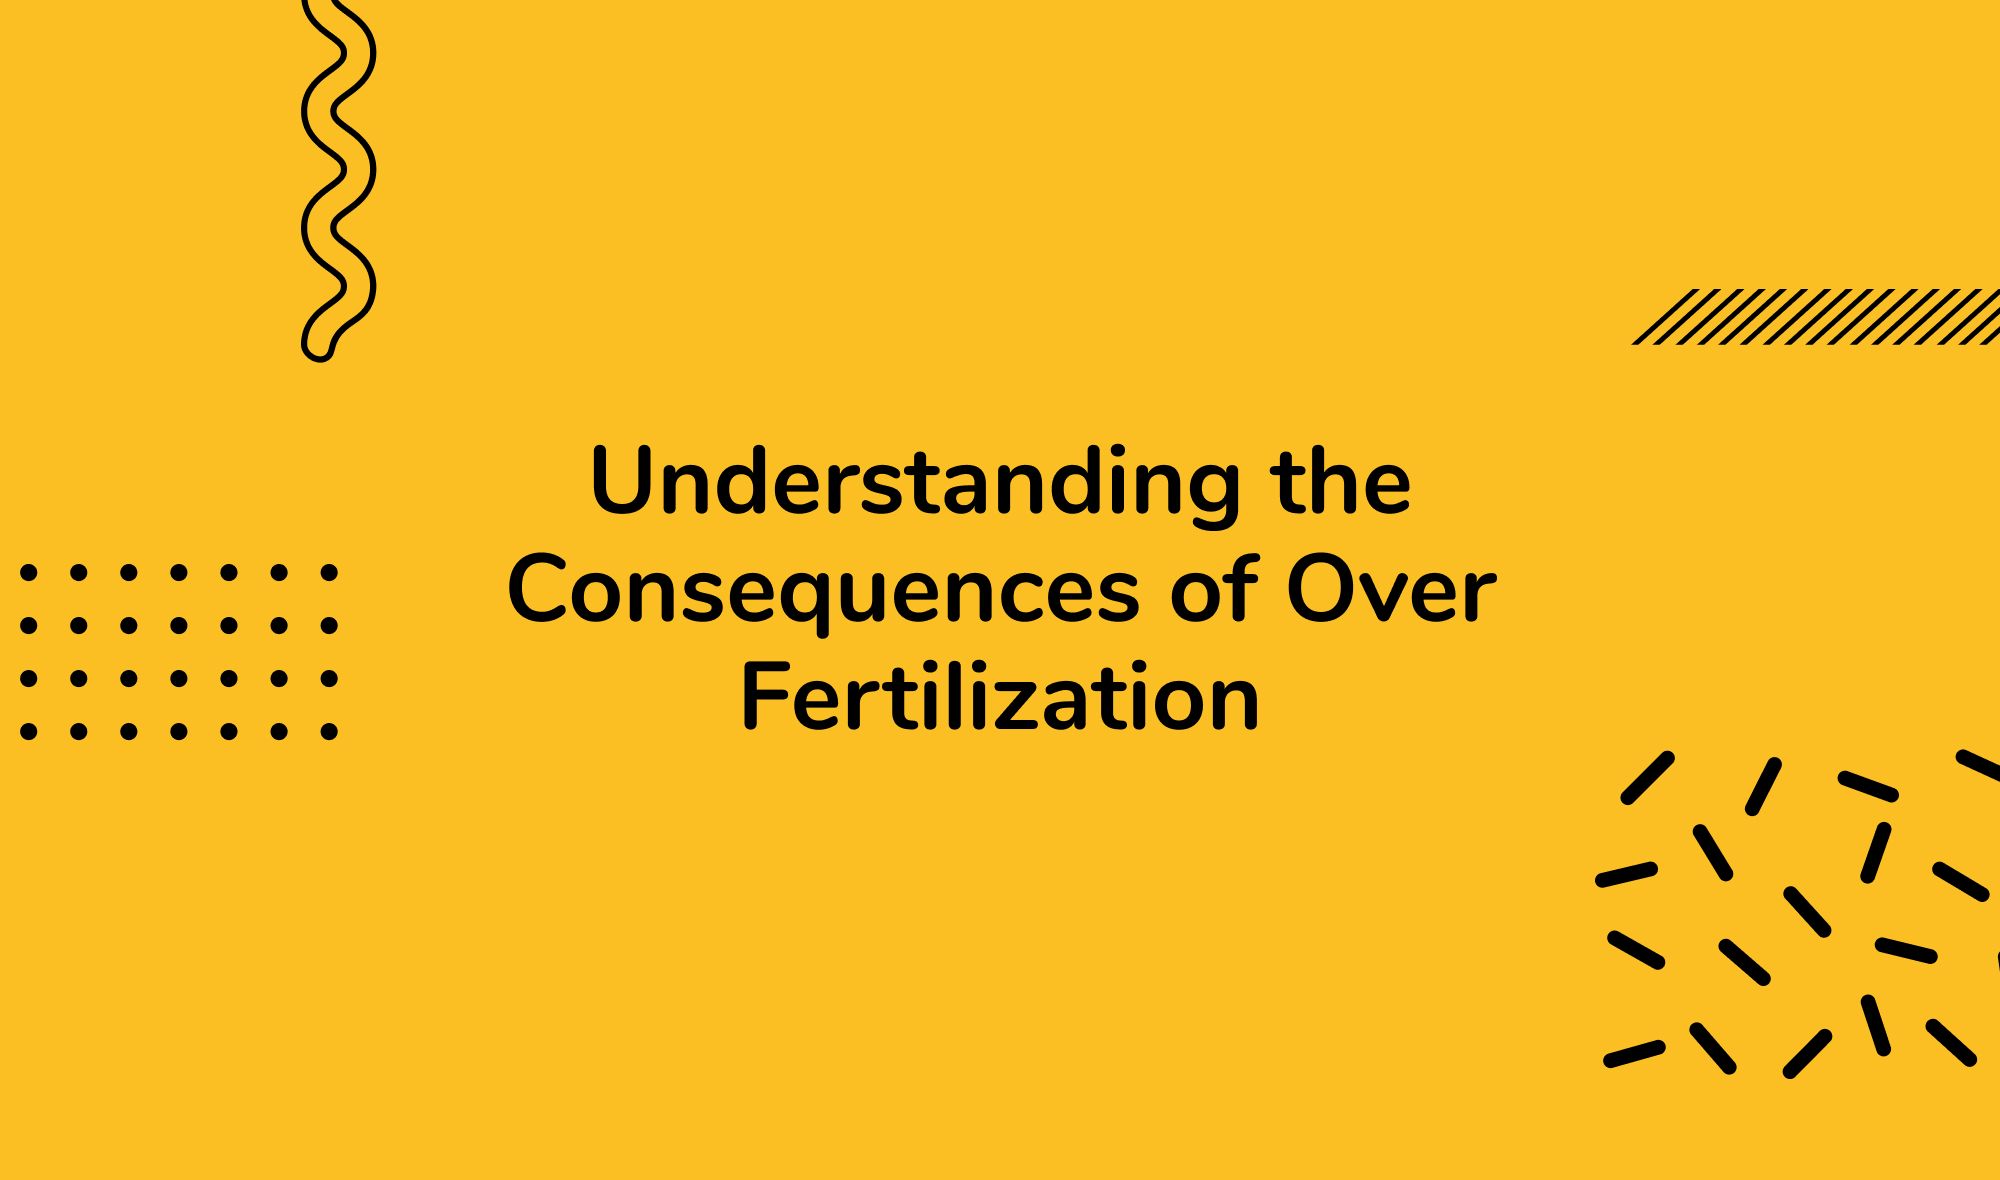 Understanding the Consequences of Over Fertilization